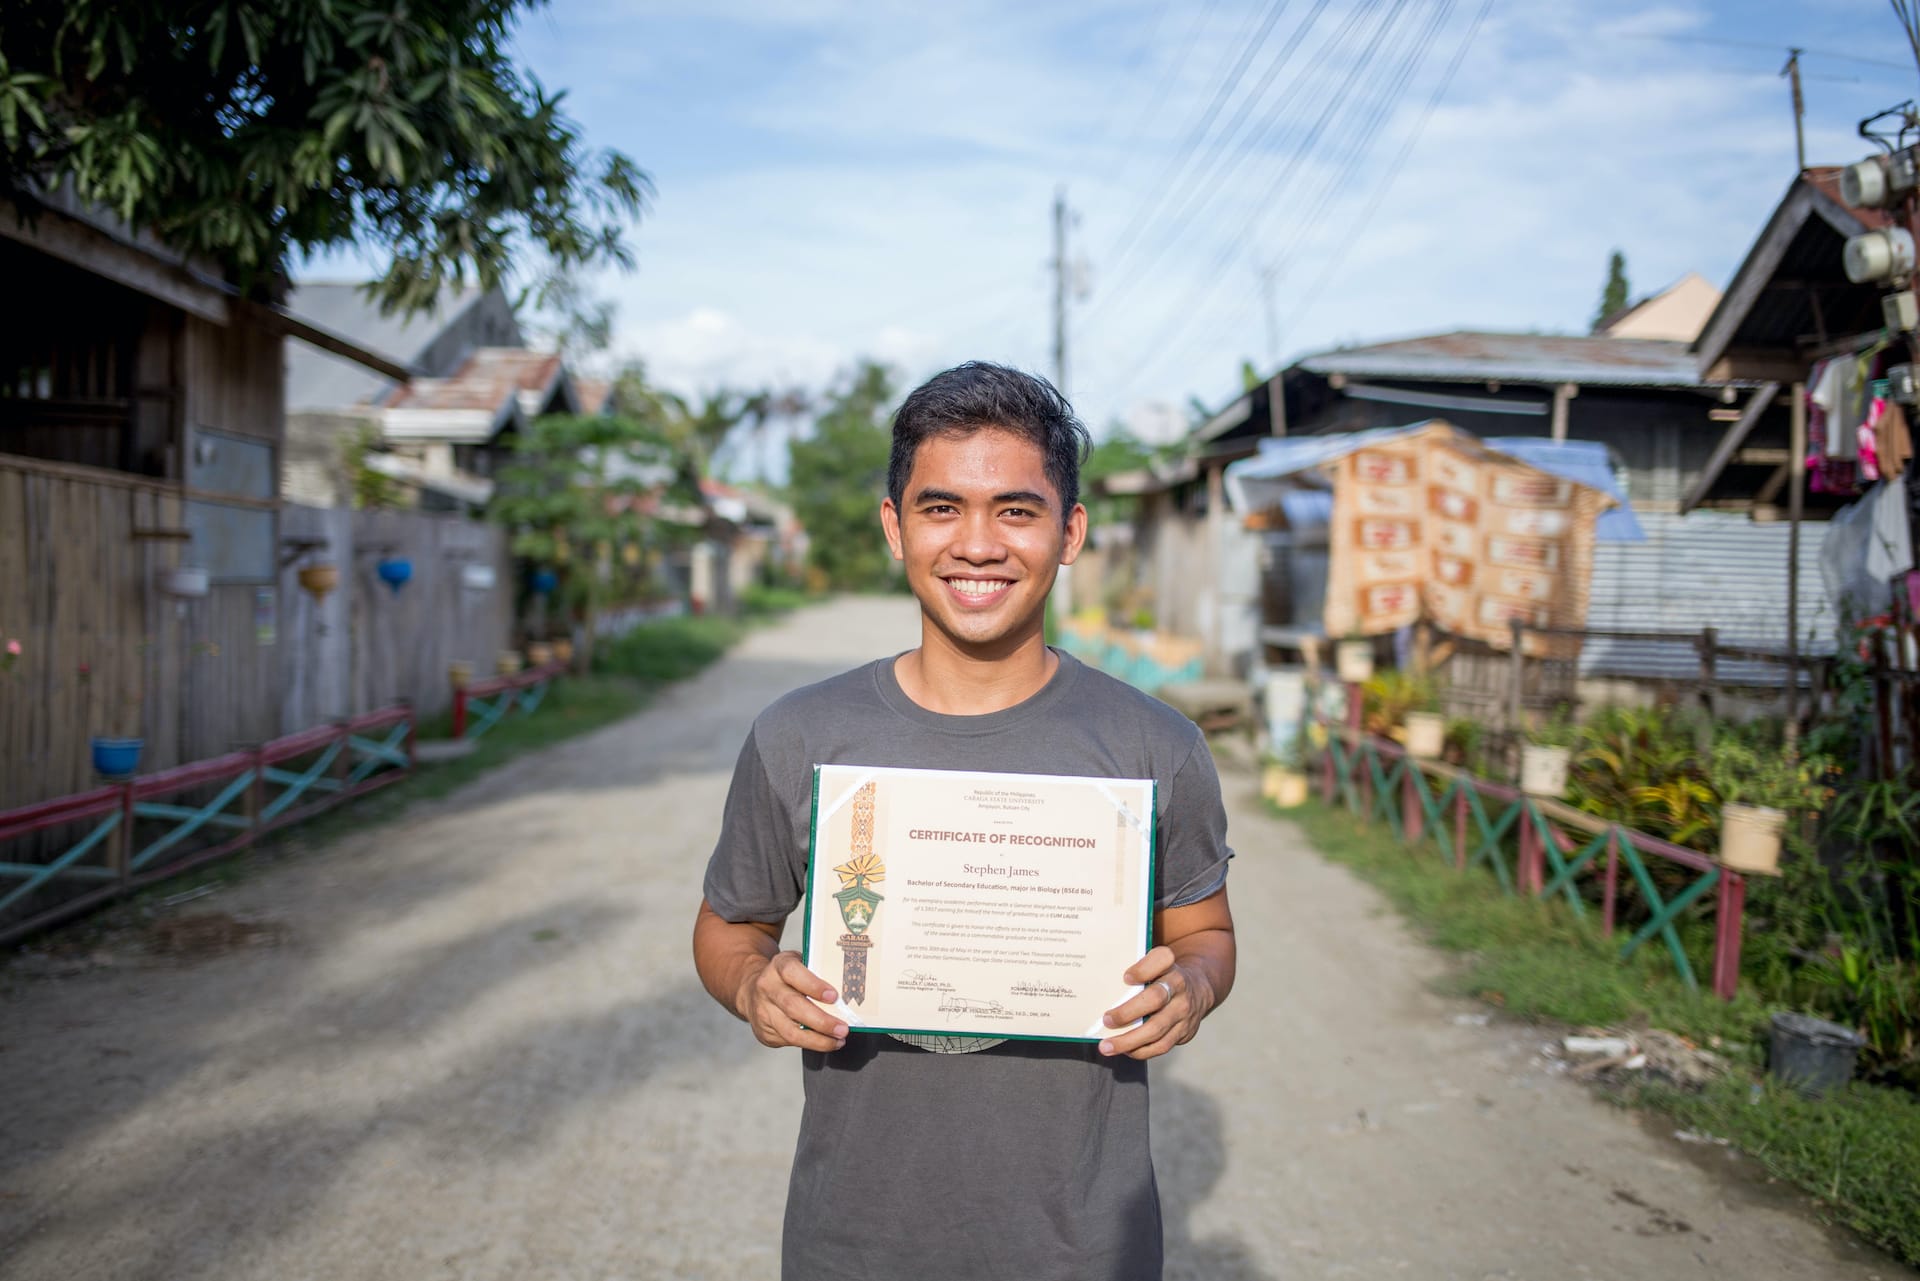 Stephen stands in the street, holding a certificate.